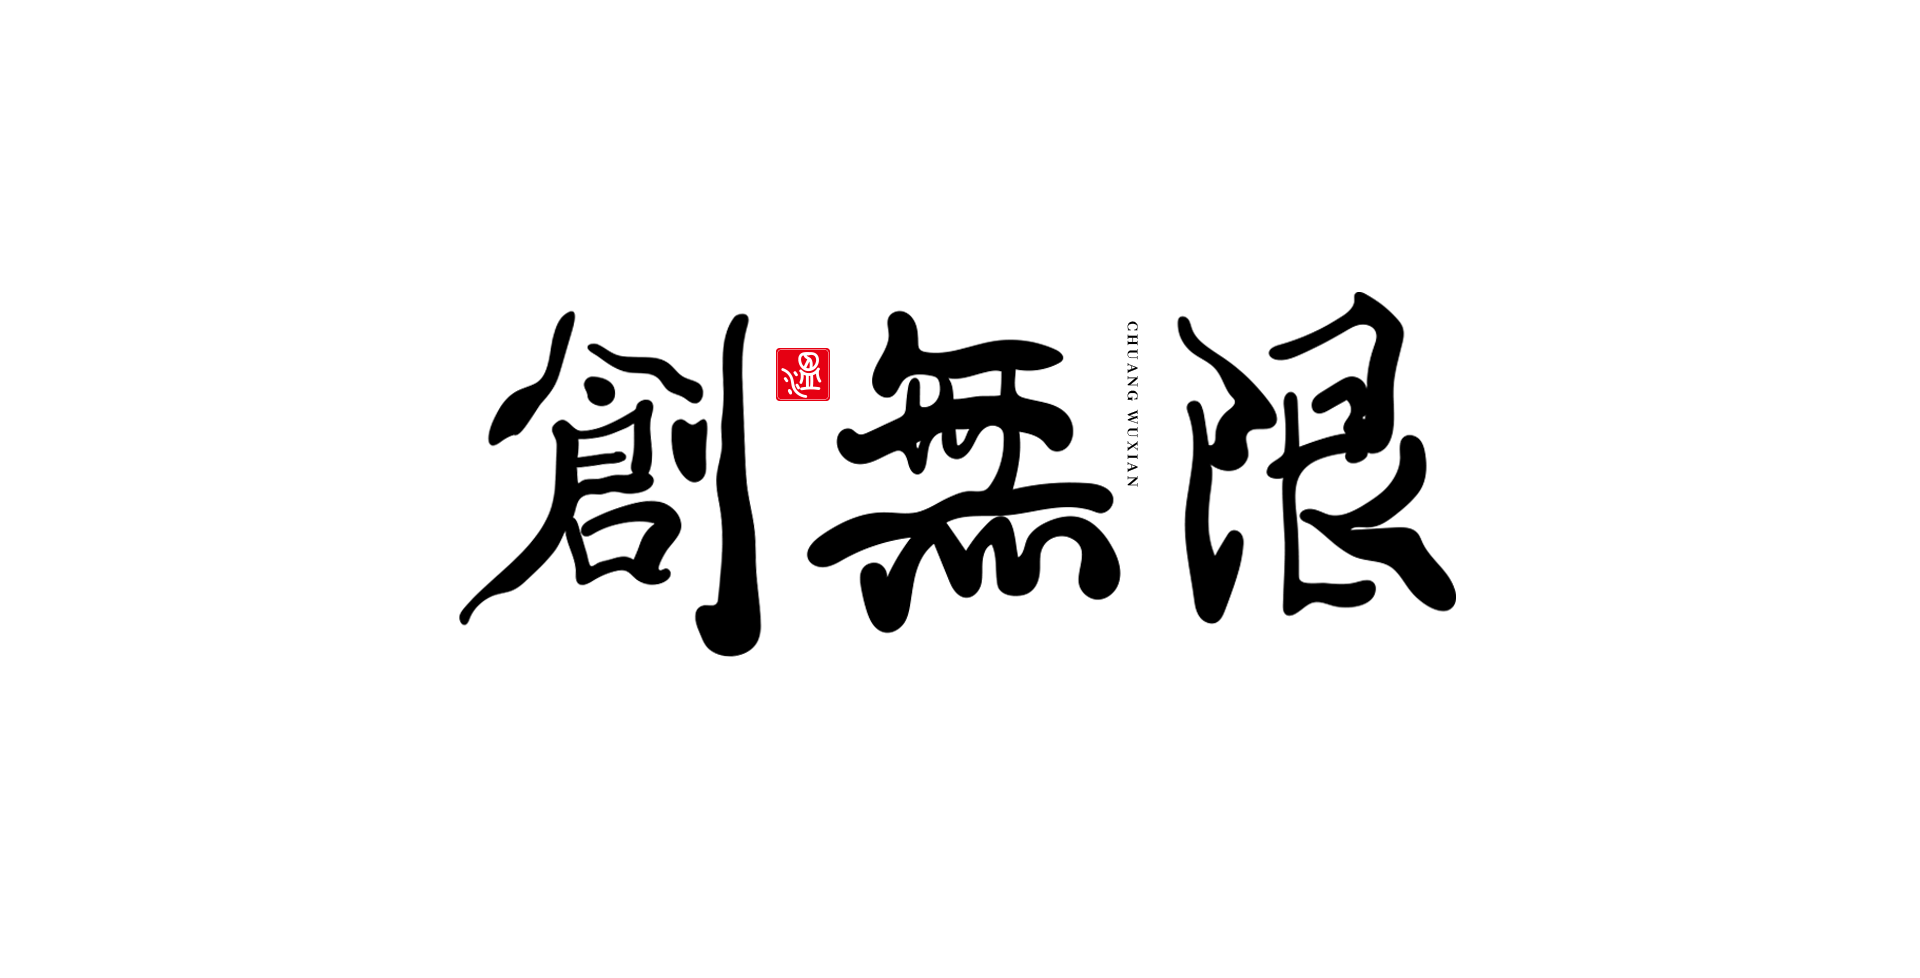 9P Collection of the latest Chinese font design schemes in 2021 #.535